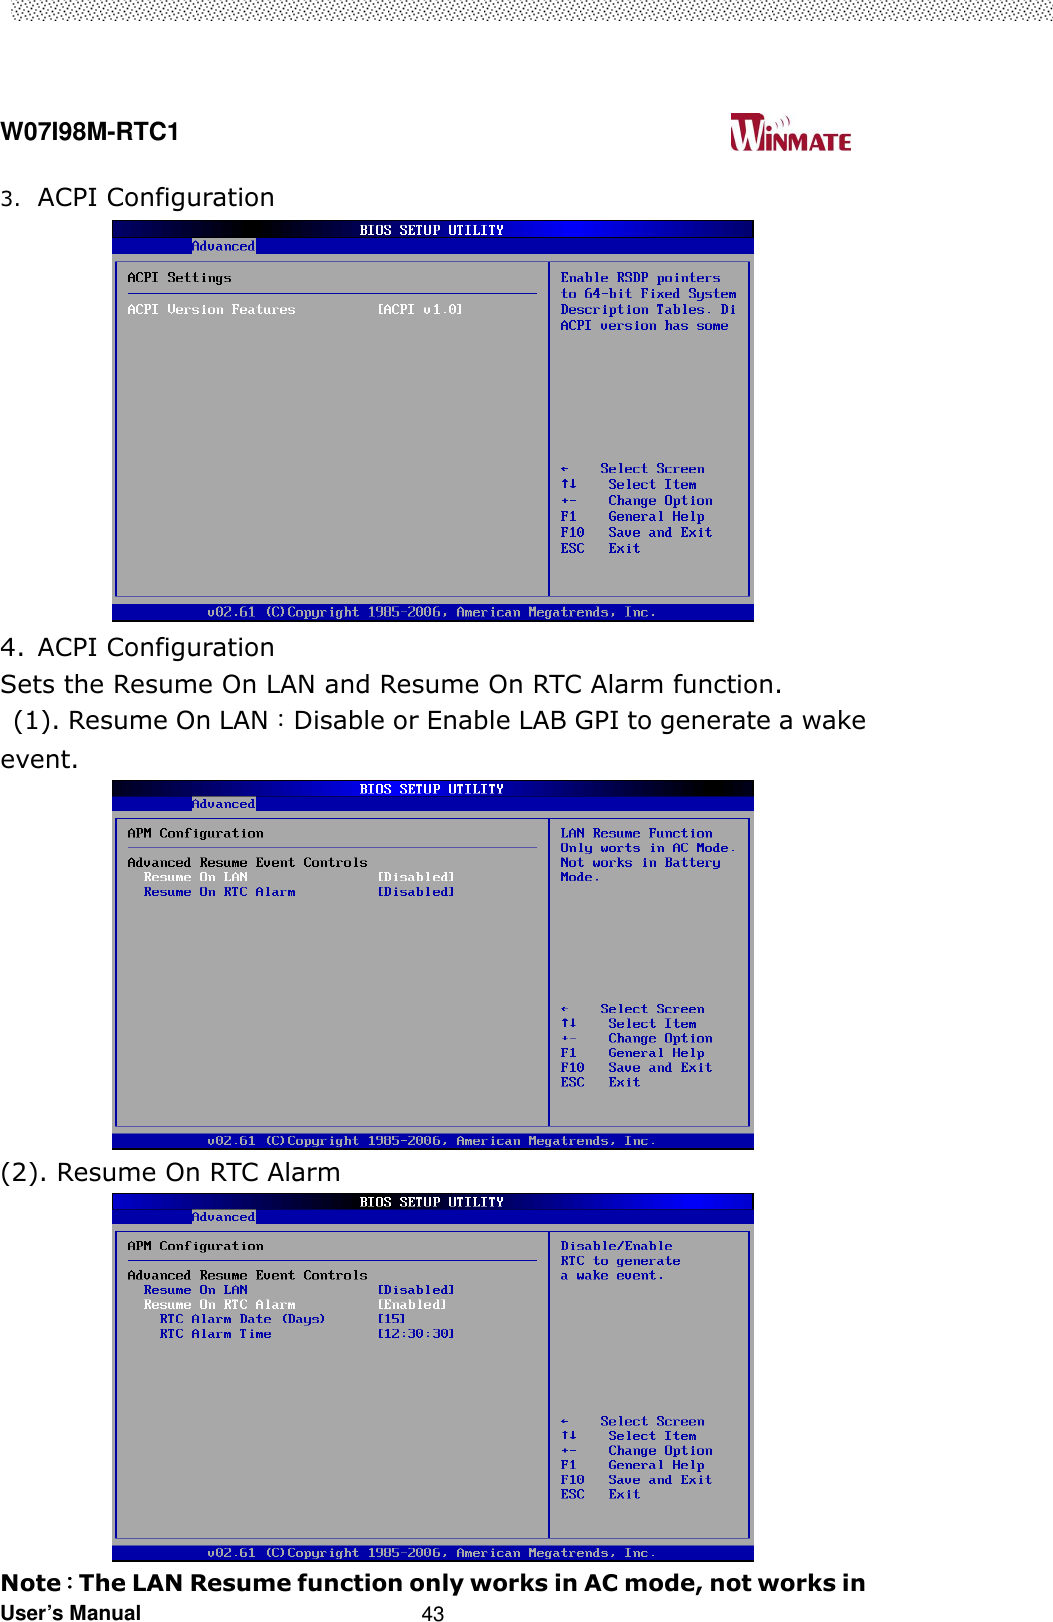  W07I98M-RTC1                                                                                   User’s Manual                                                   43 3. ACPI Configuration  4. ACPI Configuration Sets the Resume On LAN and Resume On RTC Alarm function.   (1). Resume On LAN：Disable or Enable LAB GPI to generate a wake event.  (2). Resume On RTC Alarm  Note：：：：The LAN Resume function only works in AC mode, not works in 